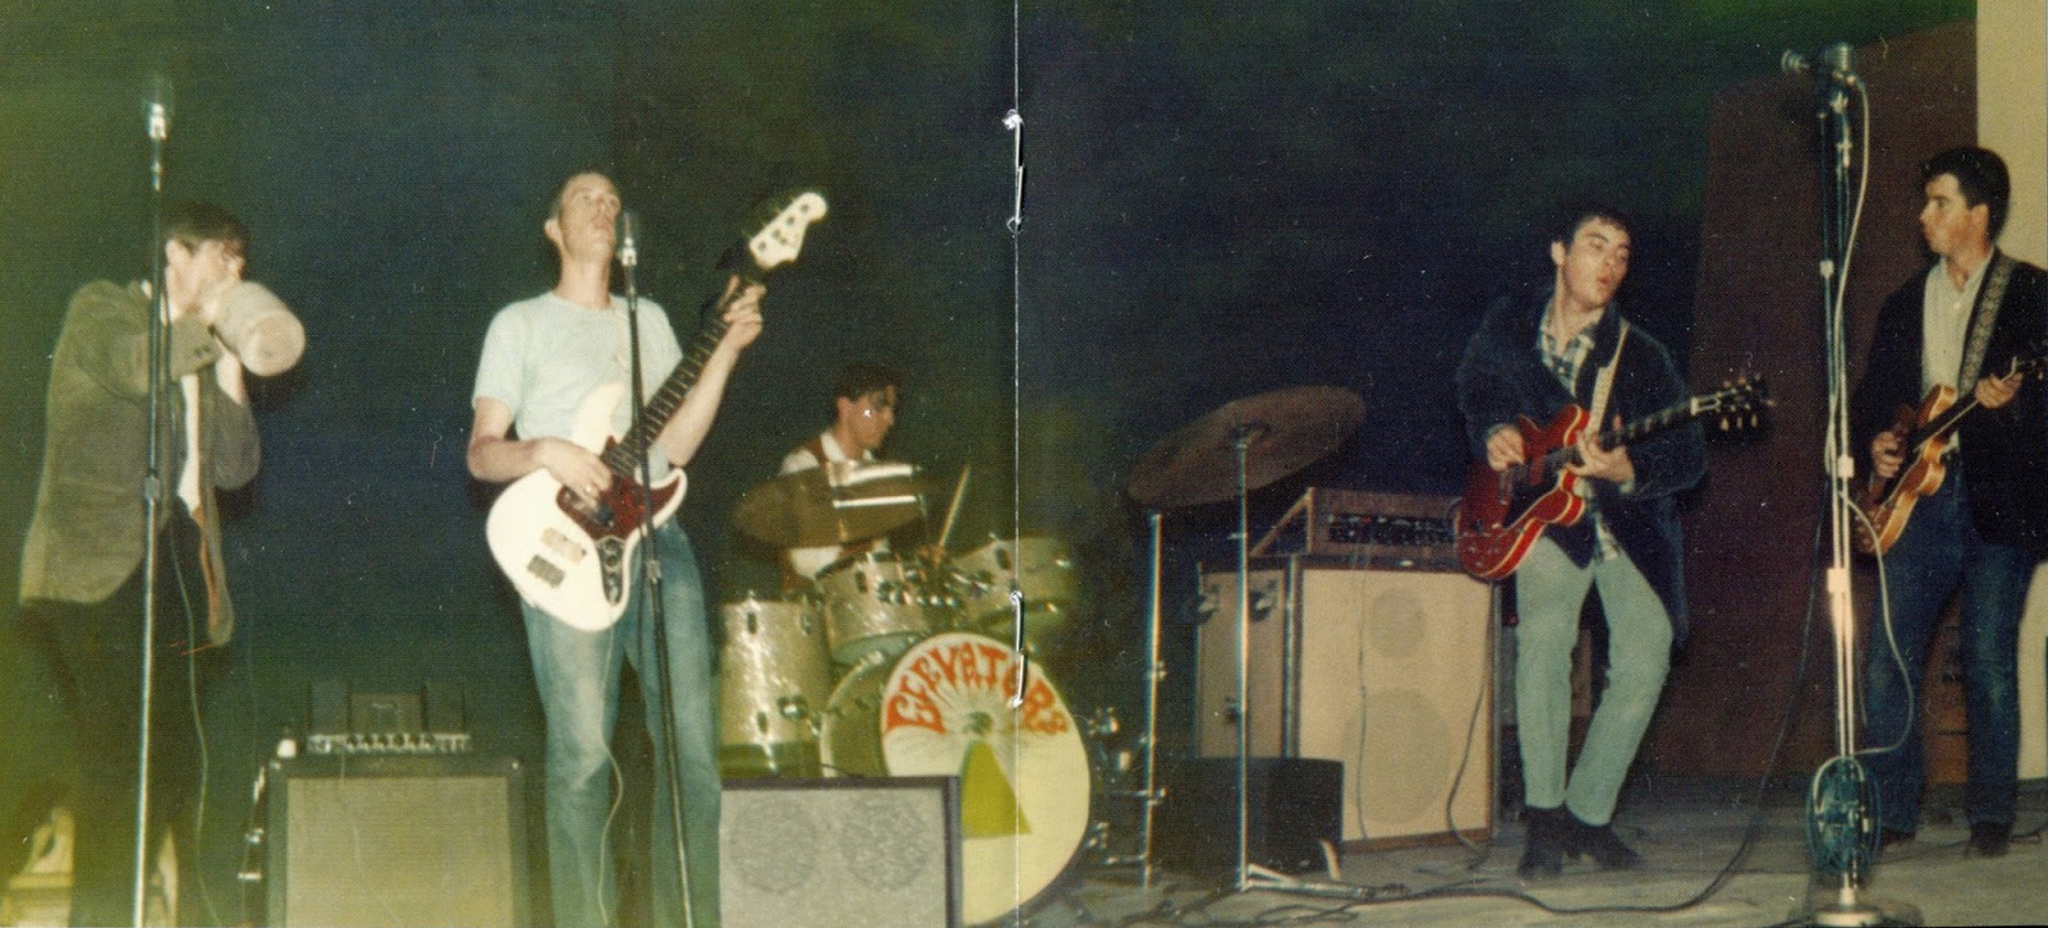 1967 Lsd The 13th Floor Elevators On A Spinning Stage